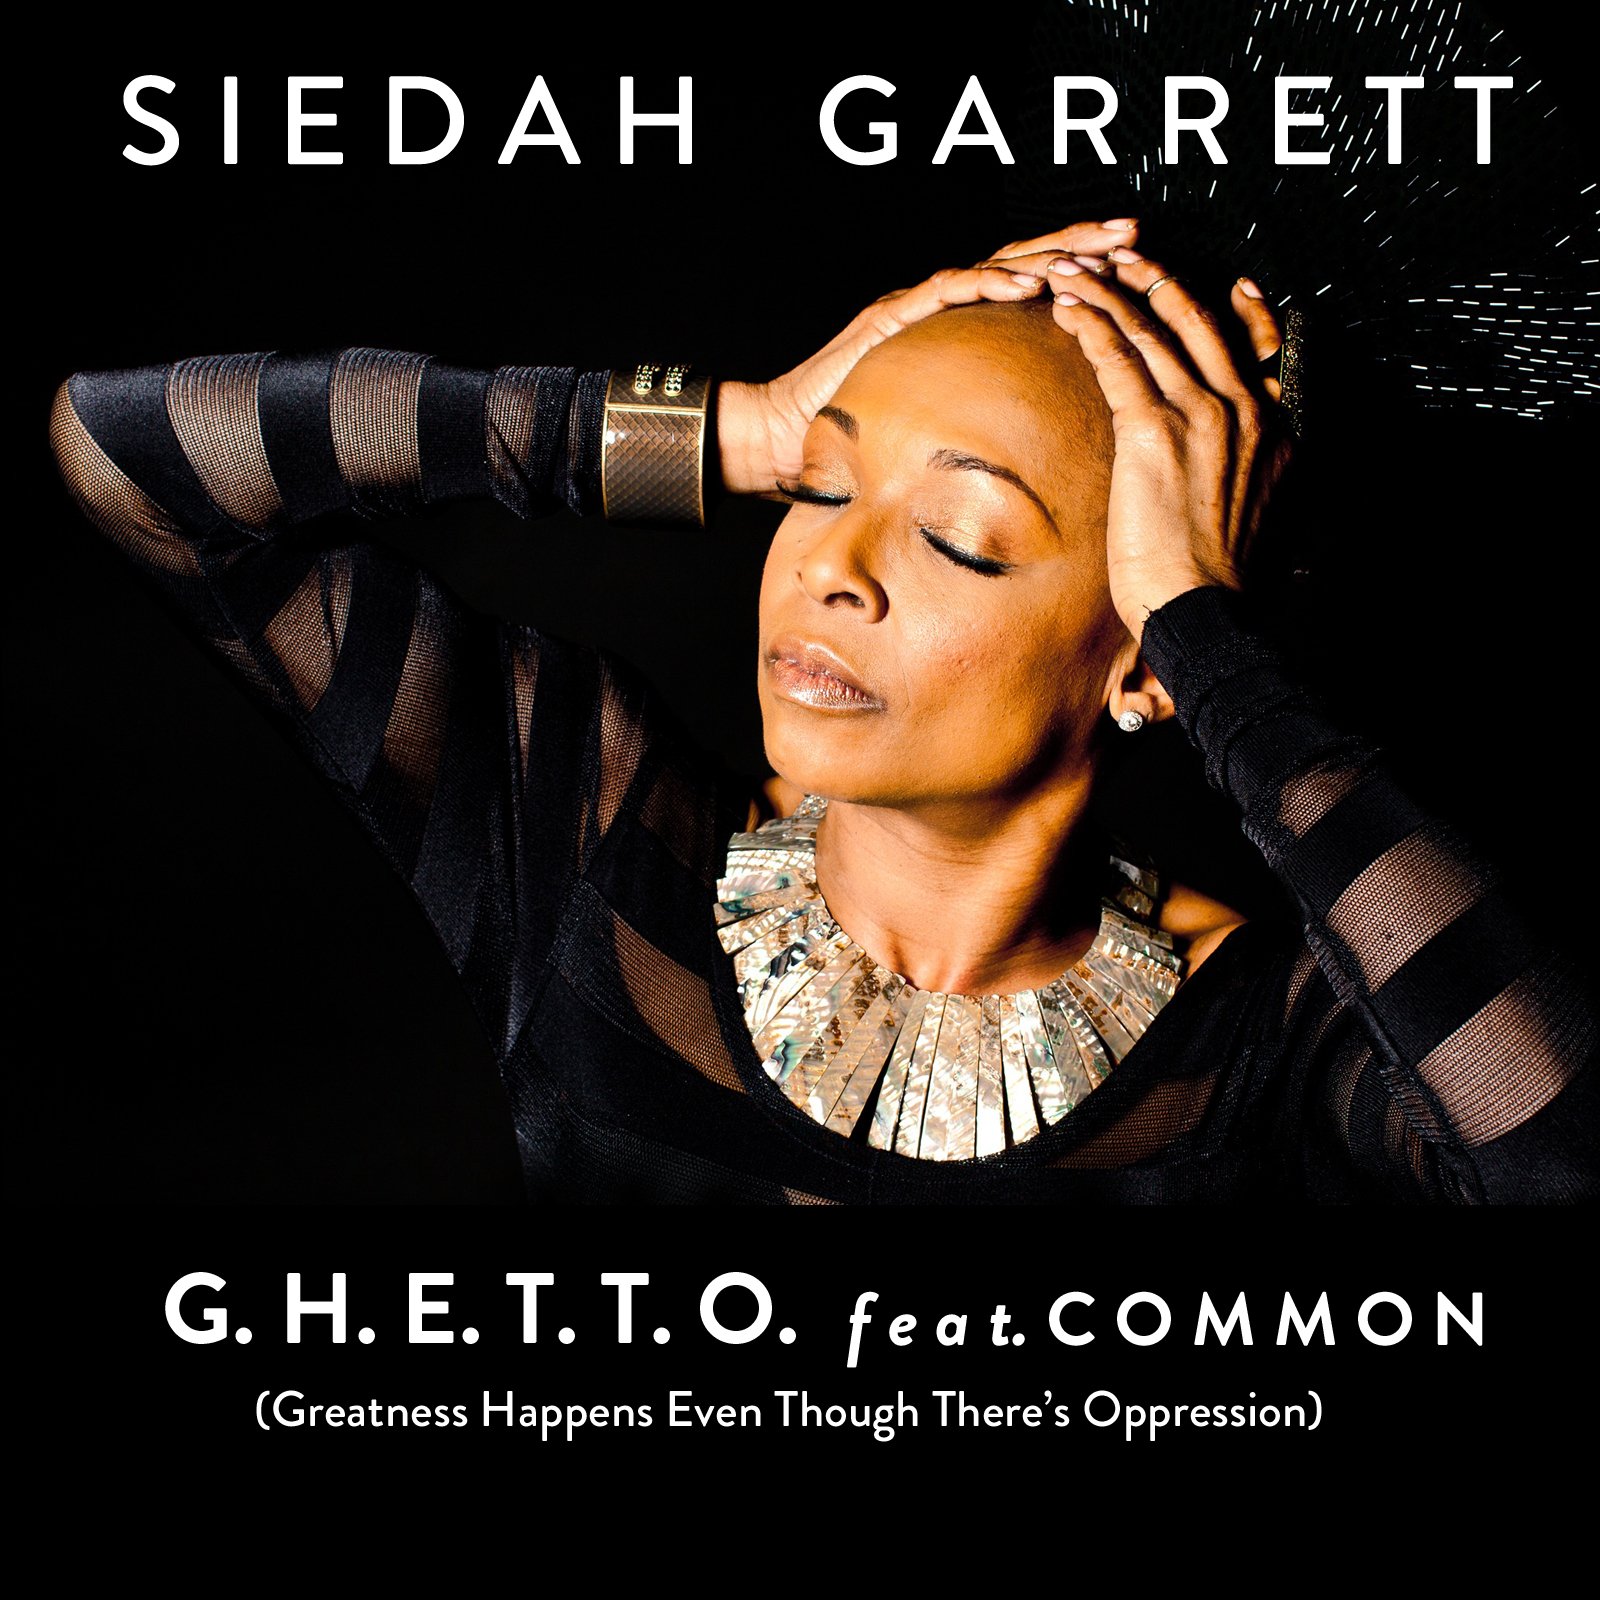 Siedah Garrett Announces Her New Track with Common G.H.E.T.T.O. (Greatness Happens Even Though There's Oppression)